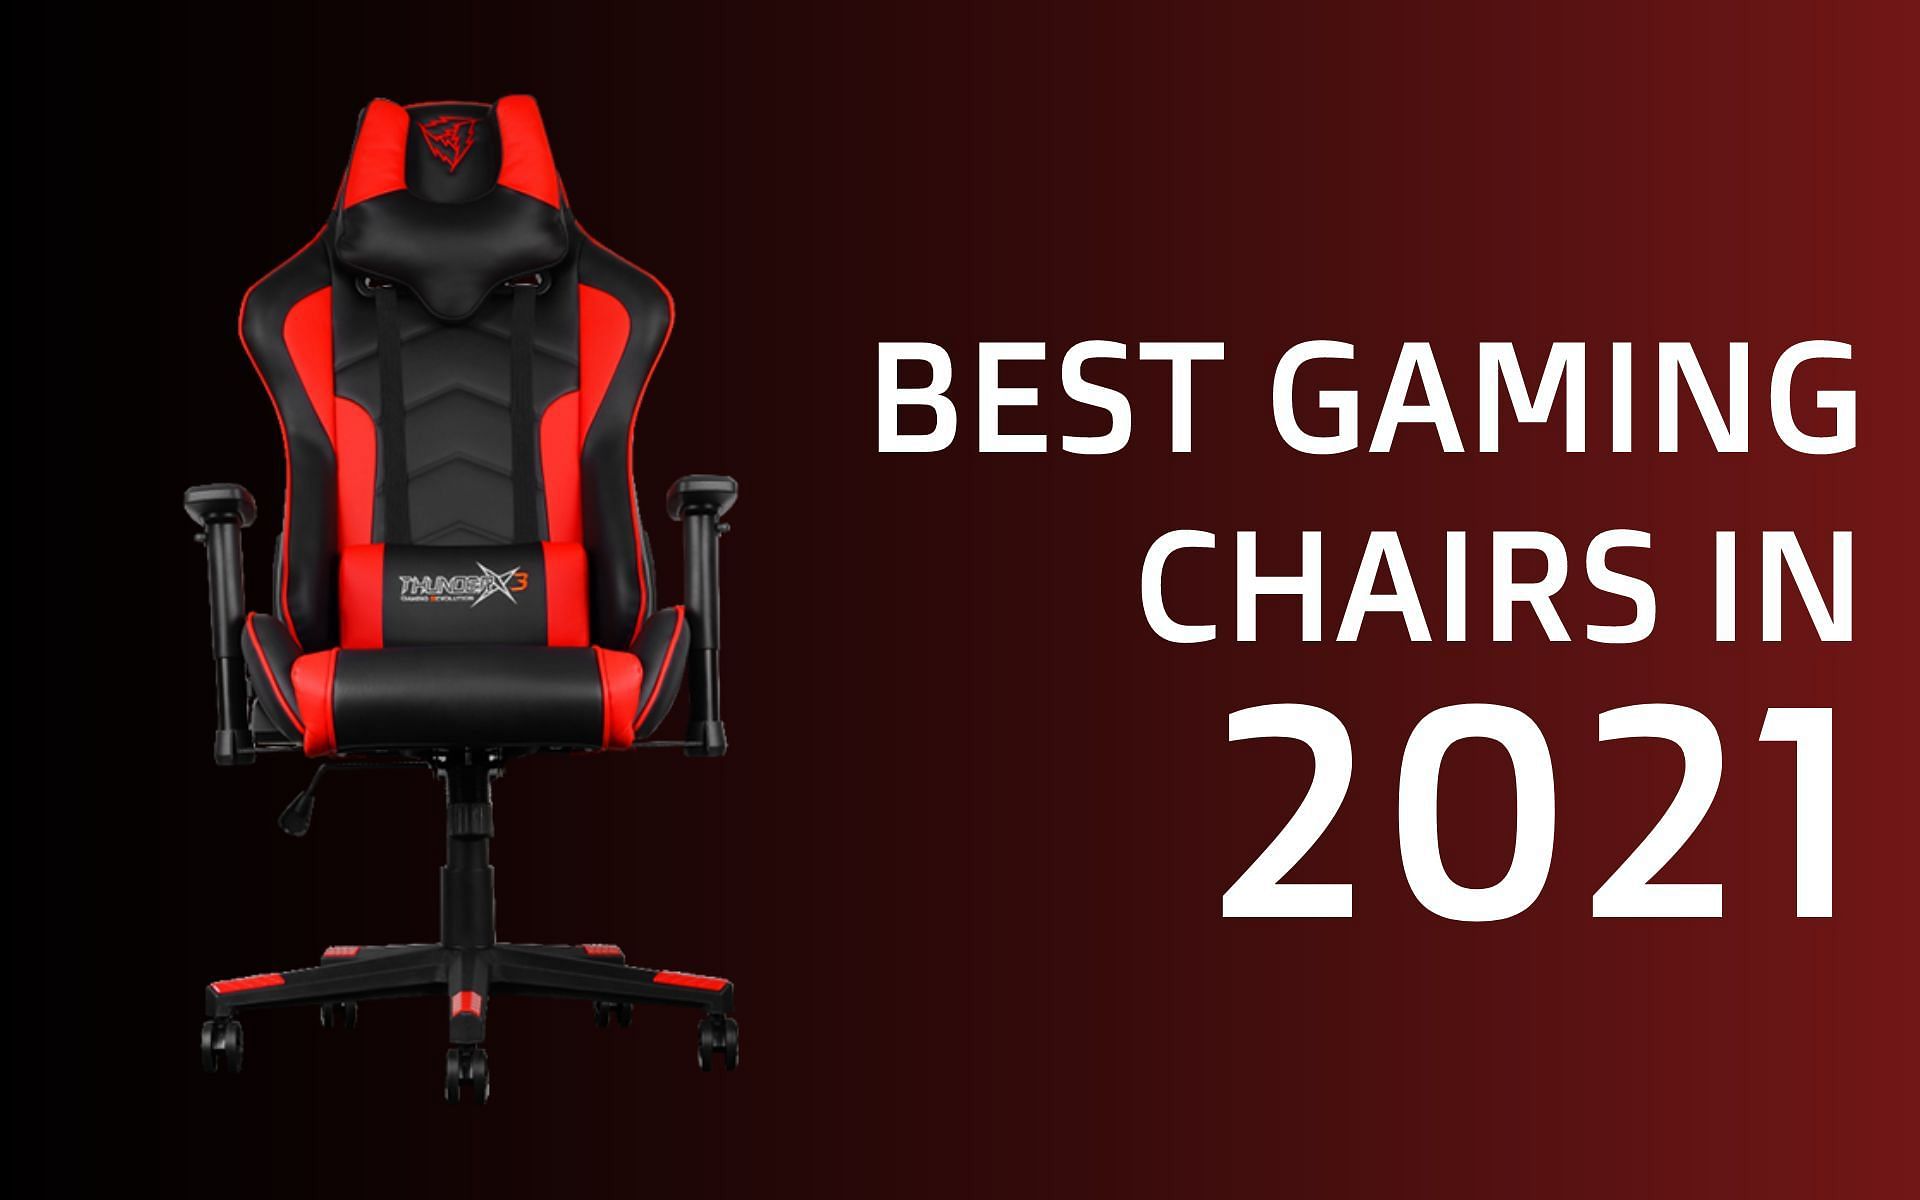 The best gaming chairs to get in 2021 (Image by Sportskeeda)